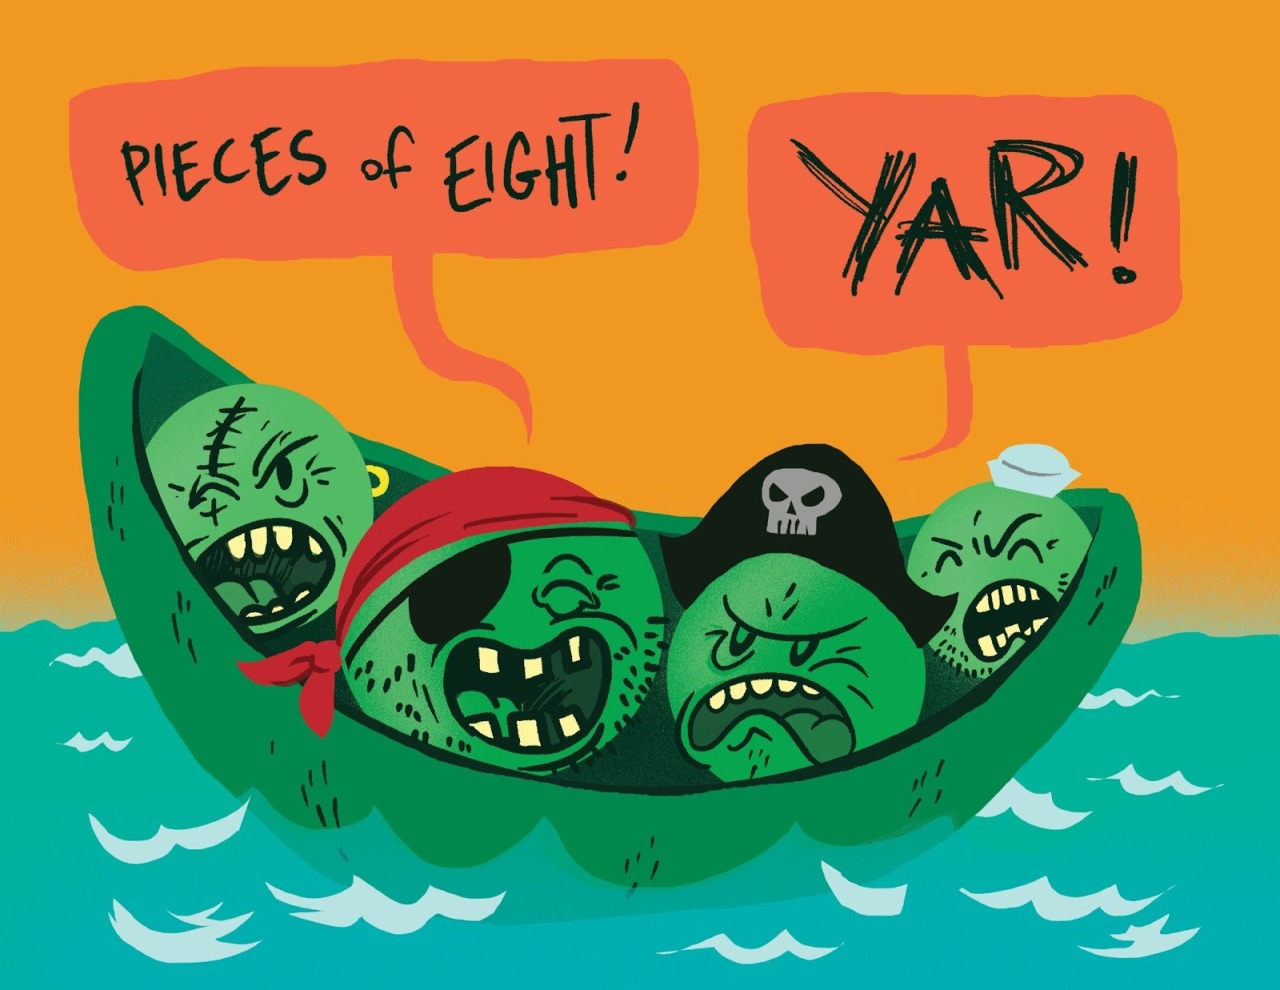 Pirate Peas in a Podillustration for the UCB Improv Manualby David Kantrowitz